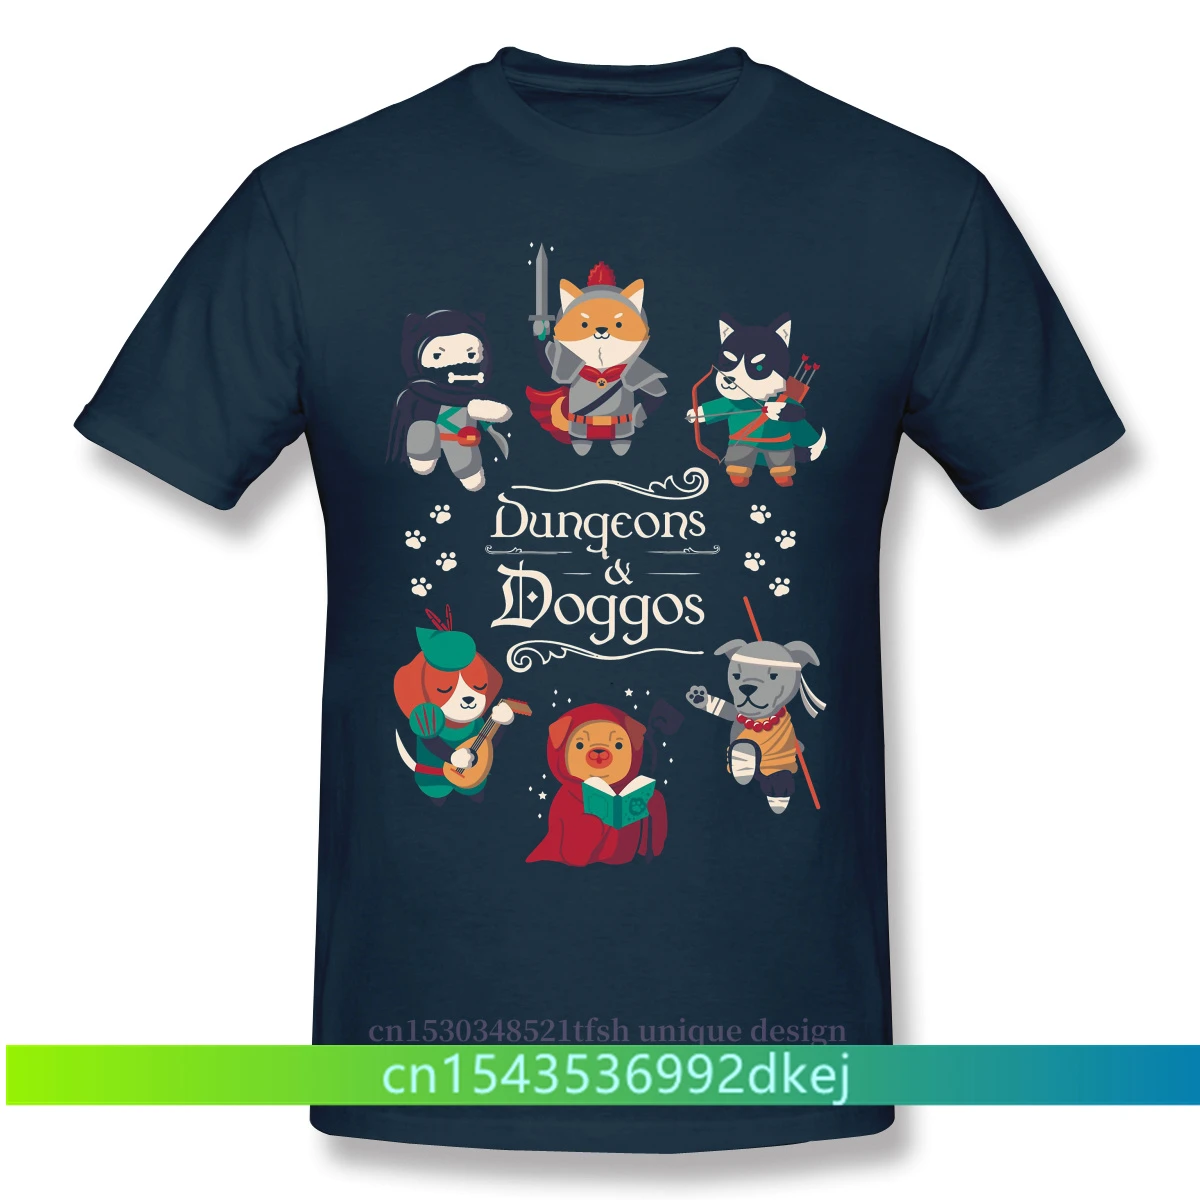 

Dungeon Master Adventure Games 2021 New Arrival T-Shirt Dungeons And Doggos Unique Design Crewneck Cotton for Men